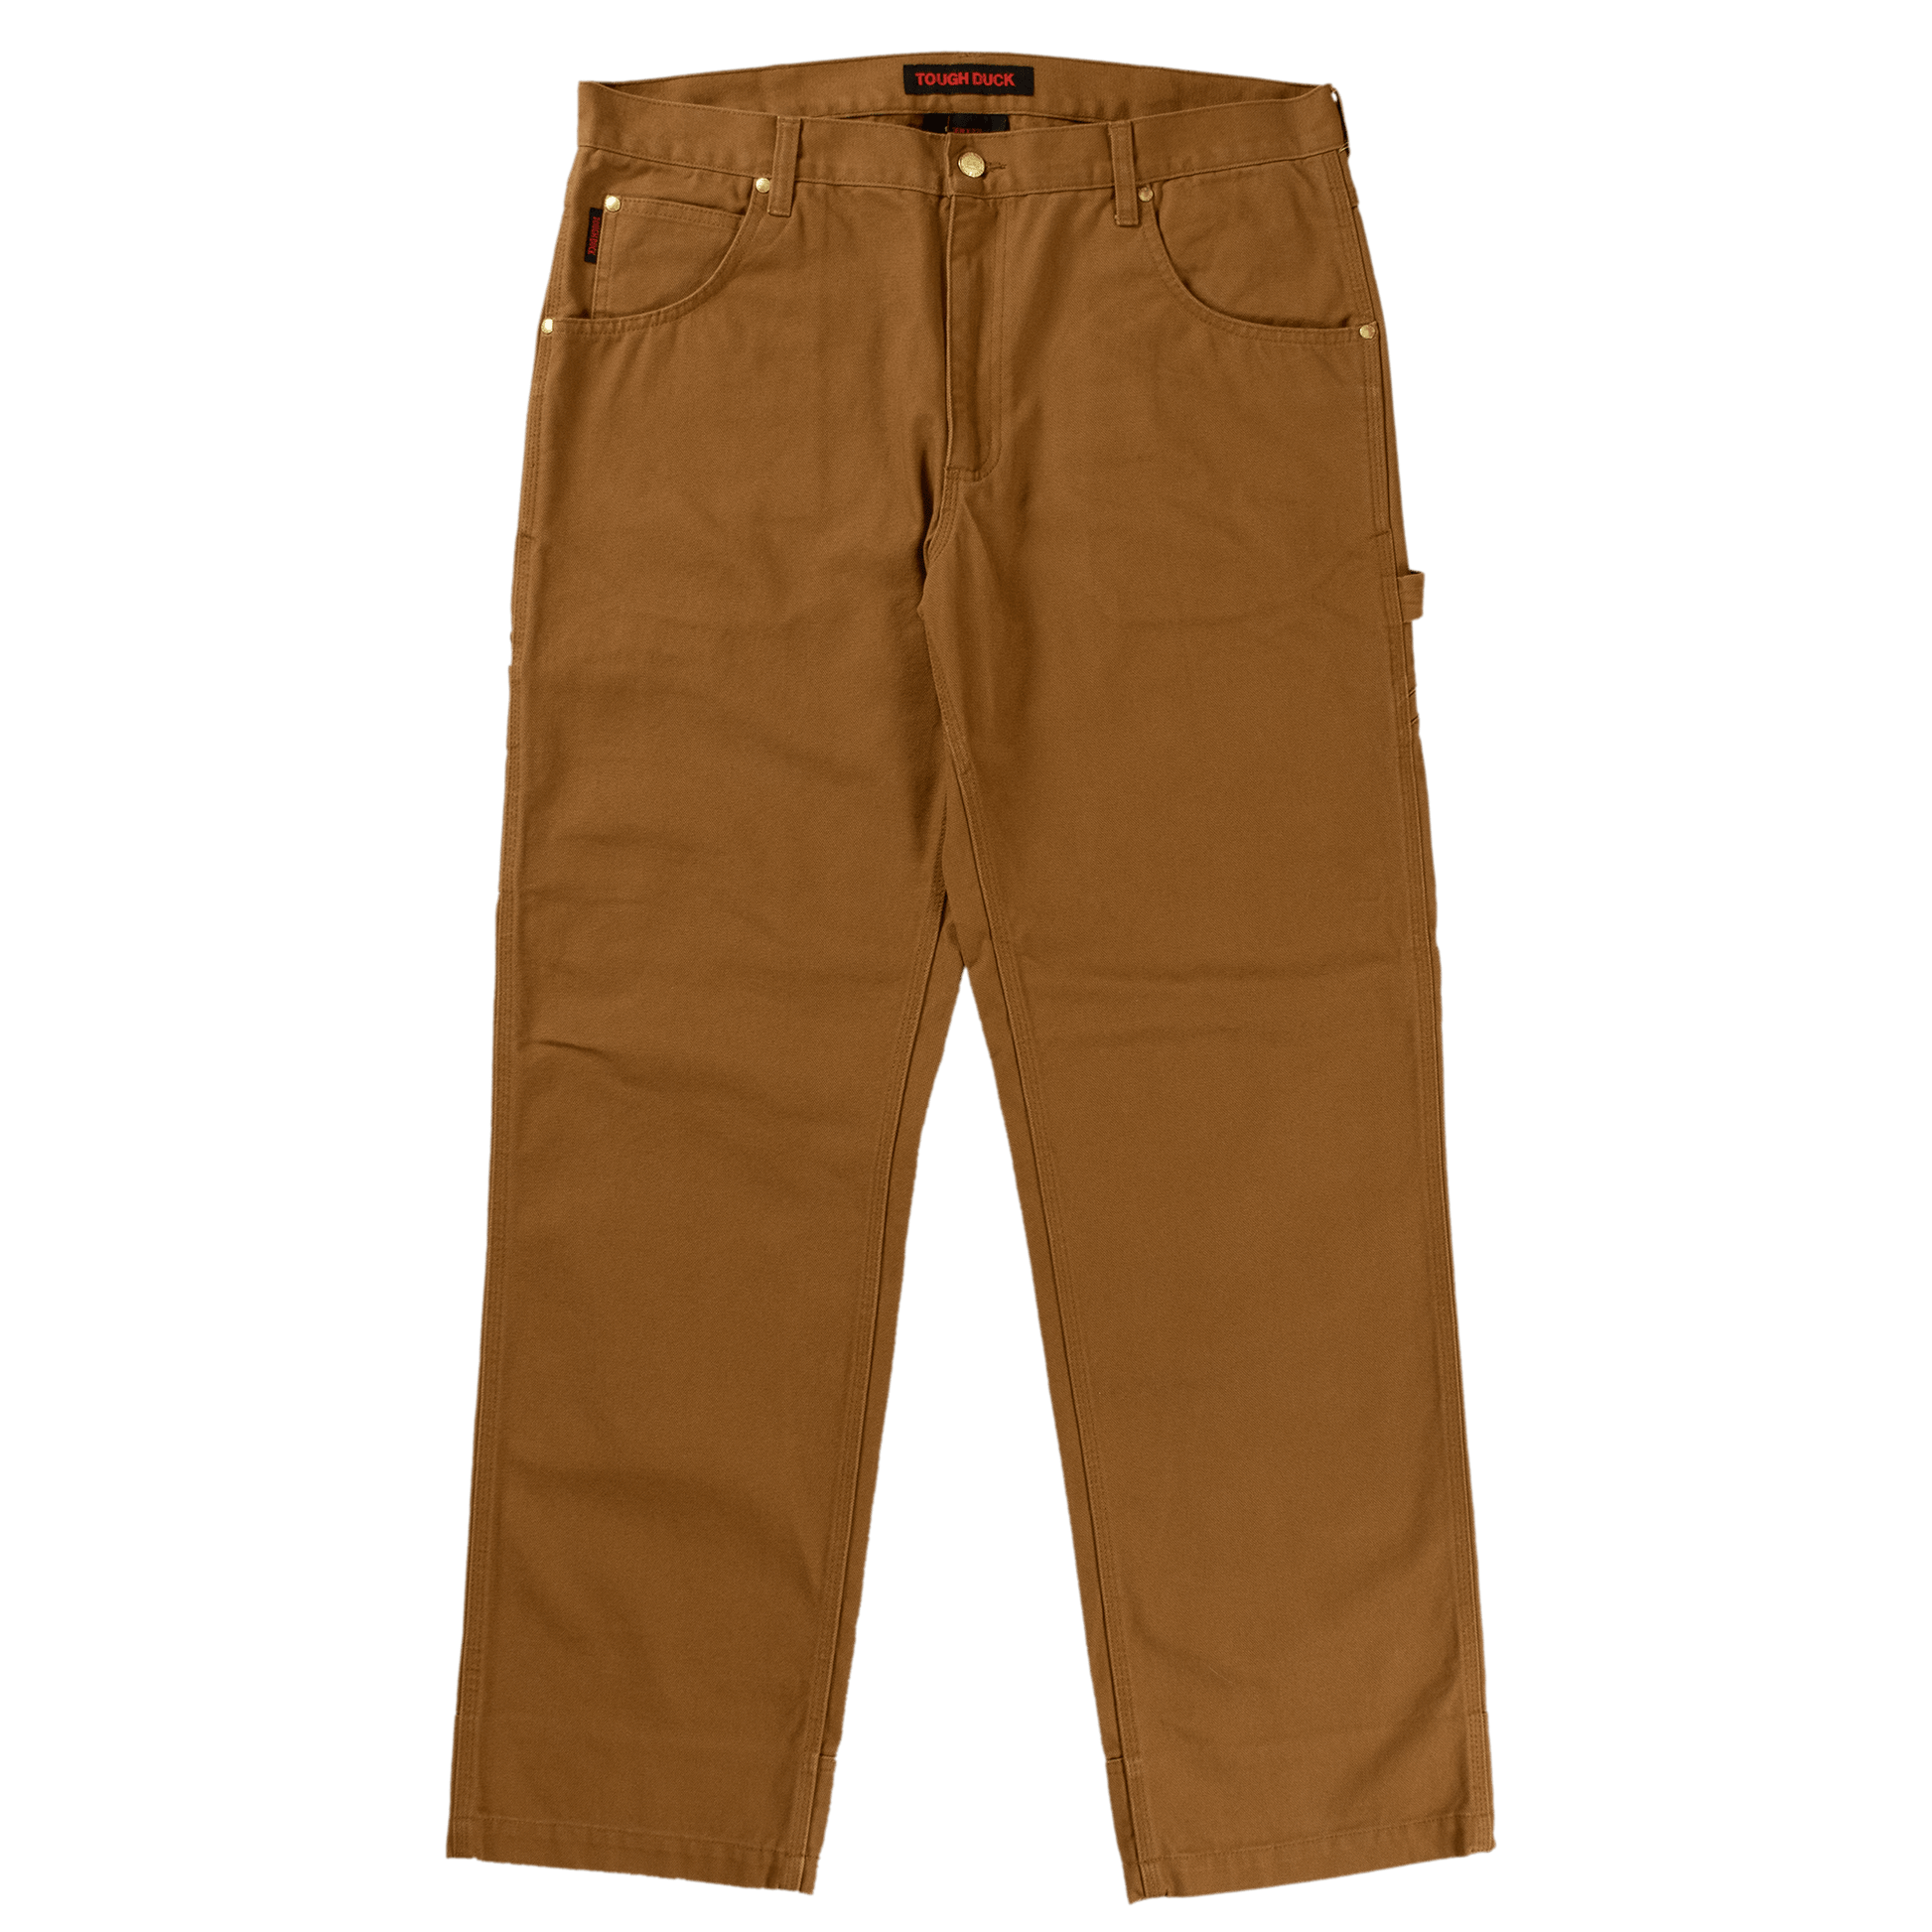 Tough Duck Washed Duck Pants - WP02 - Brown